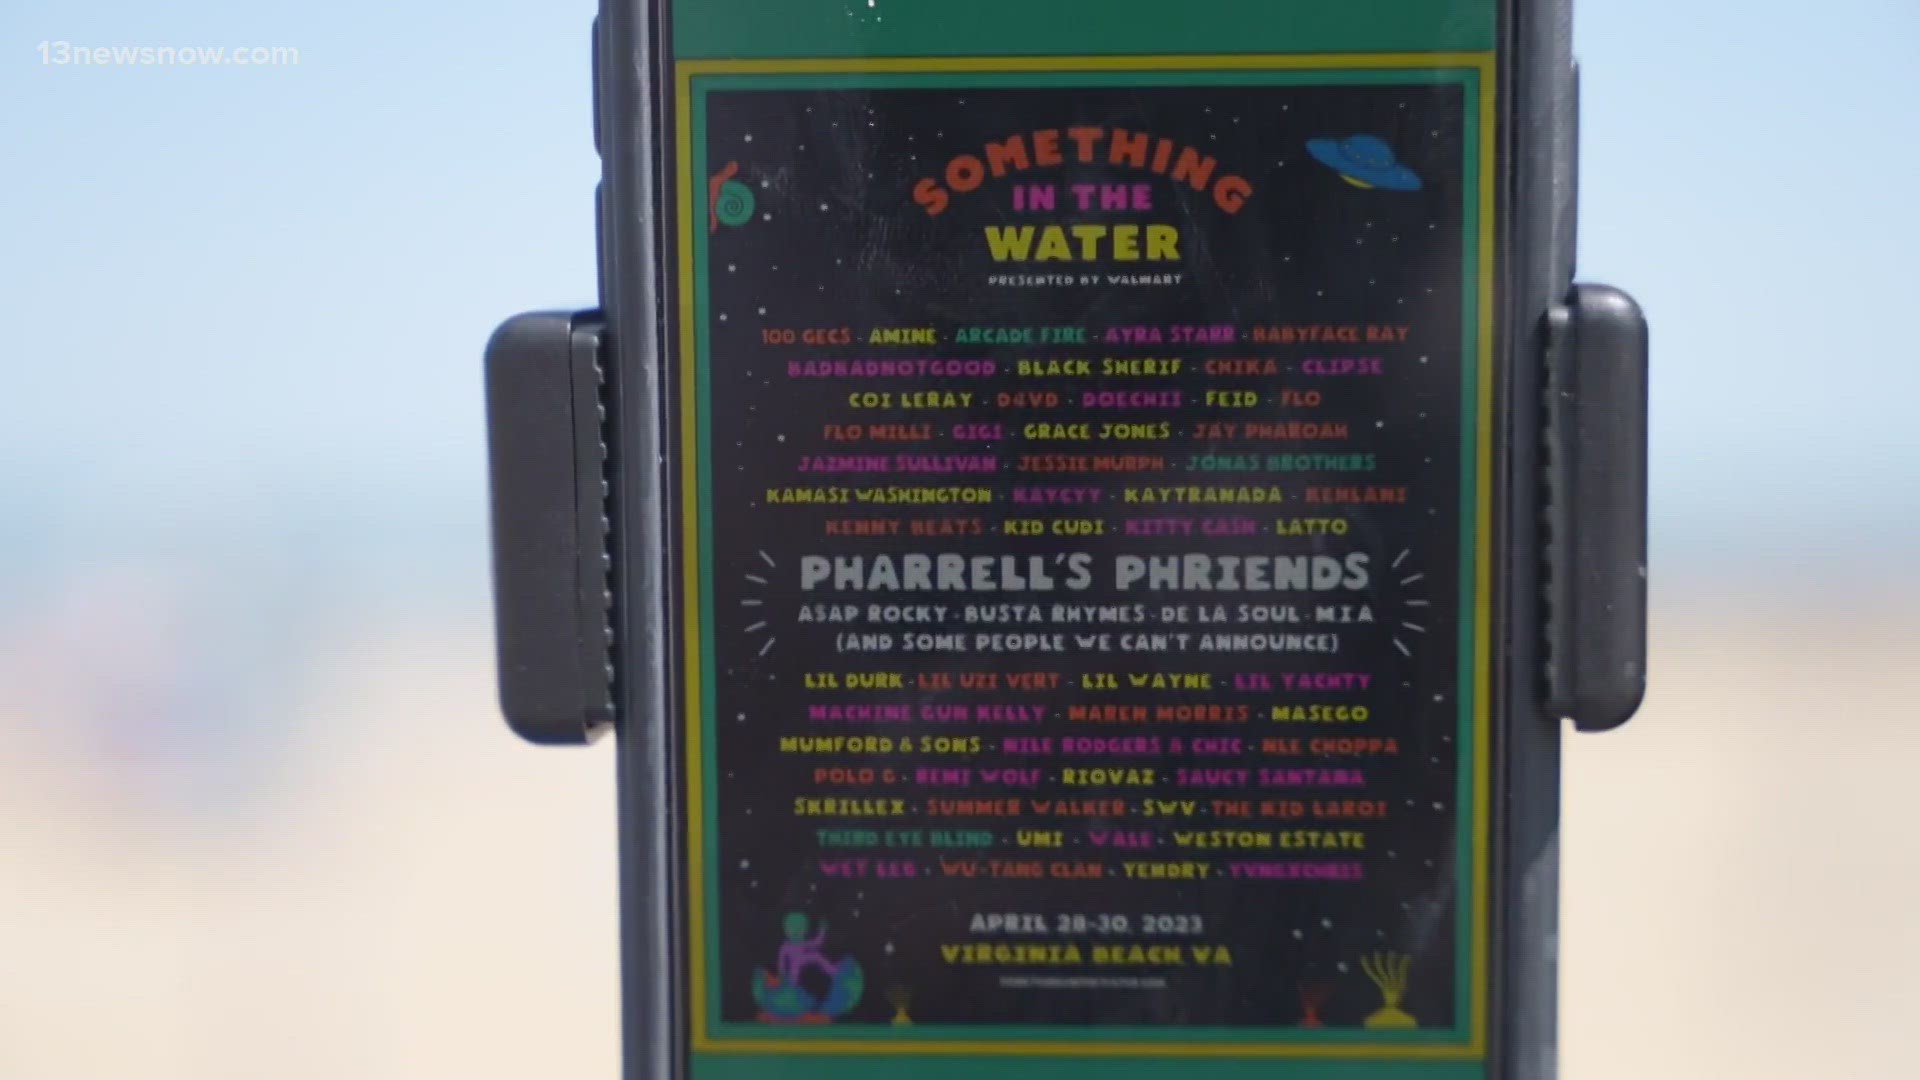 Something in the Water releases performance set times